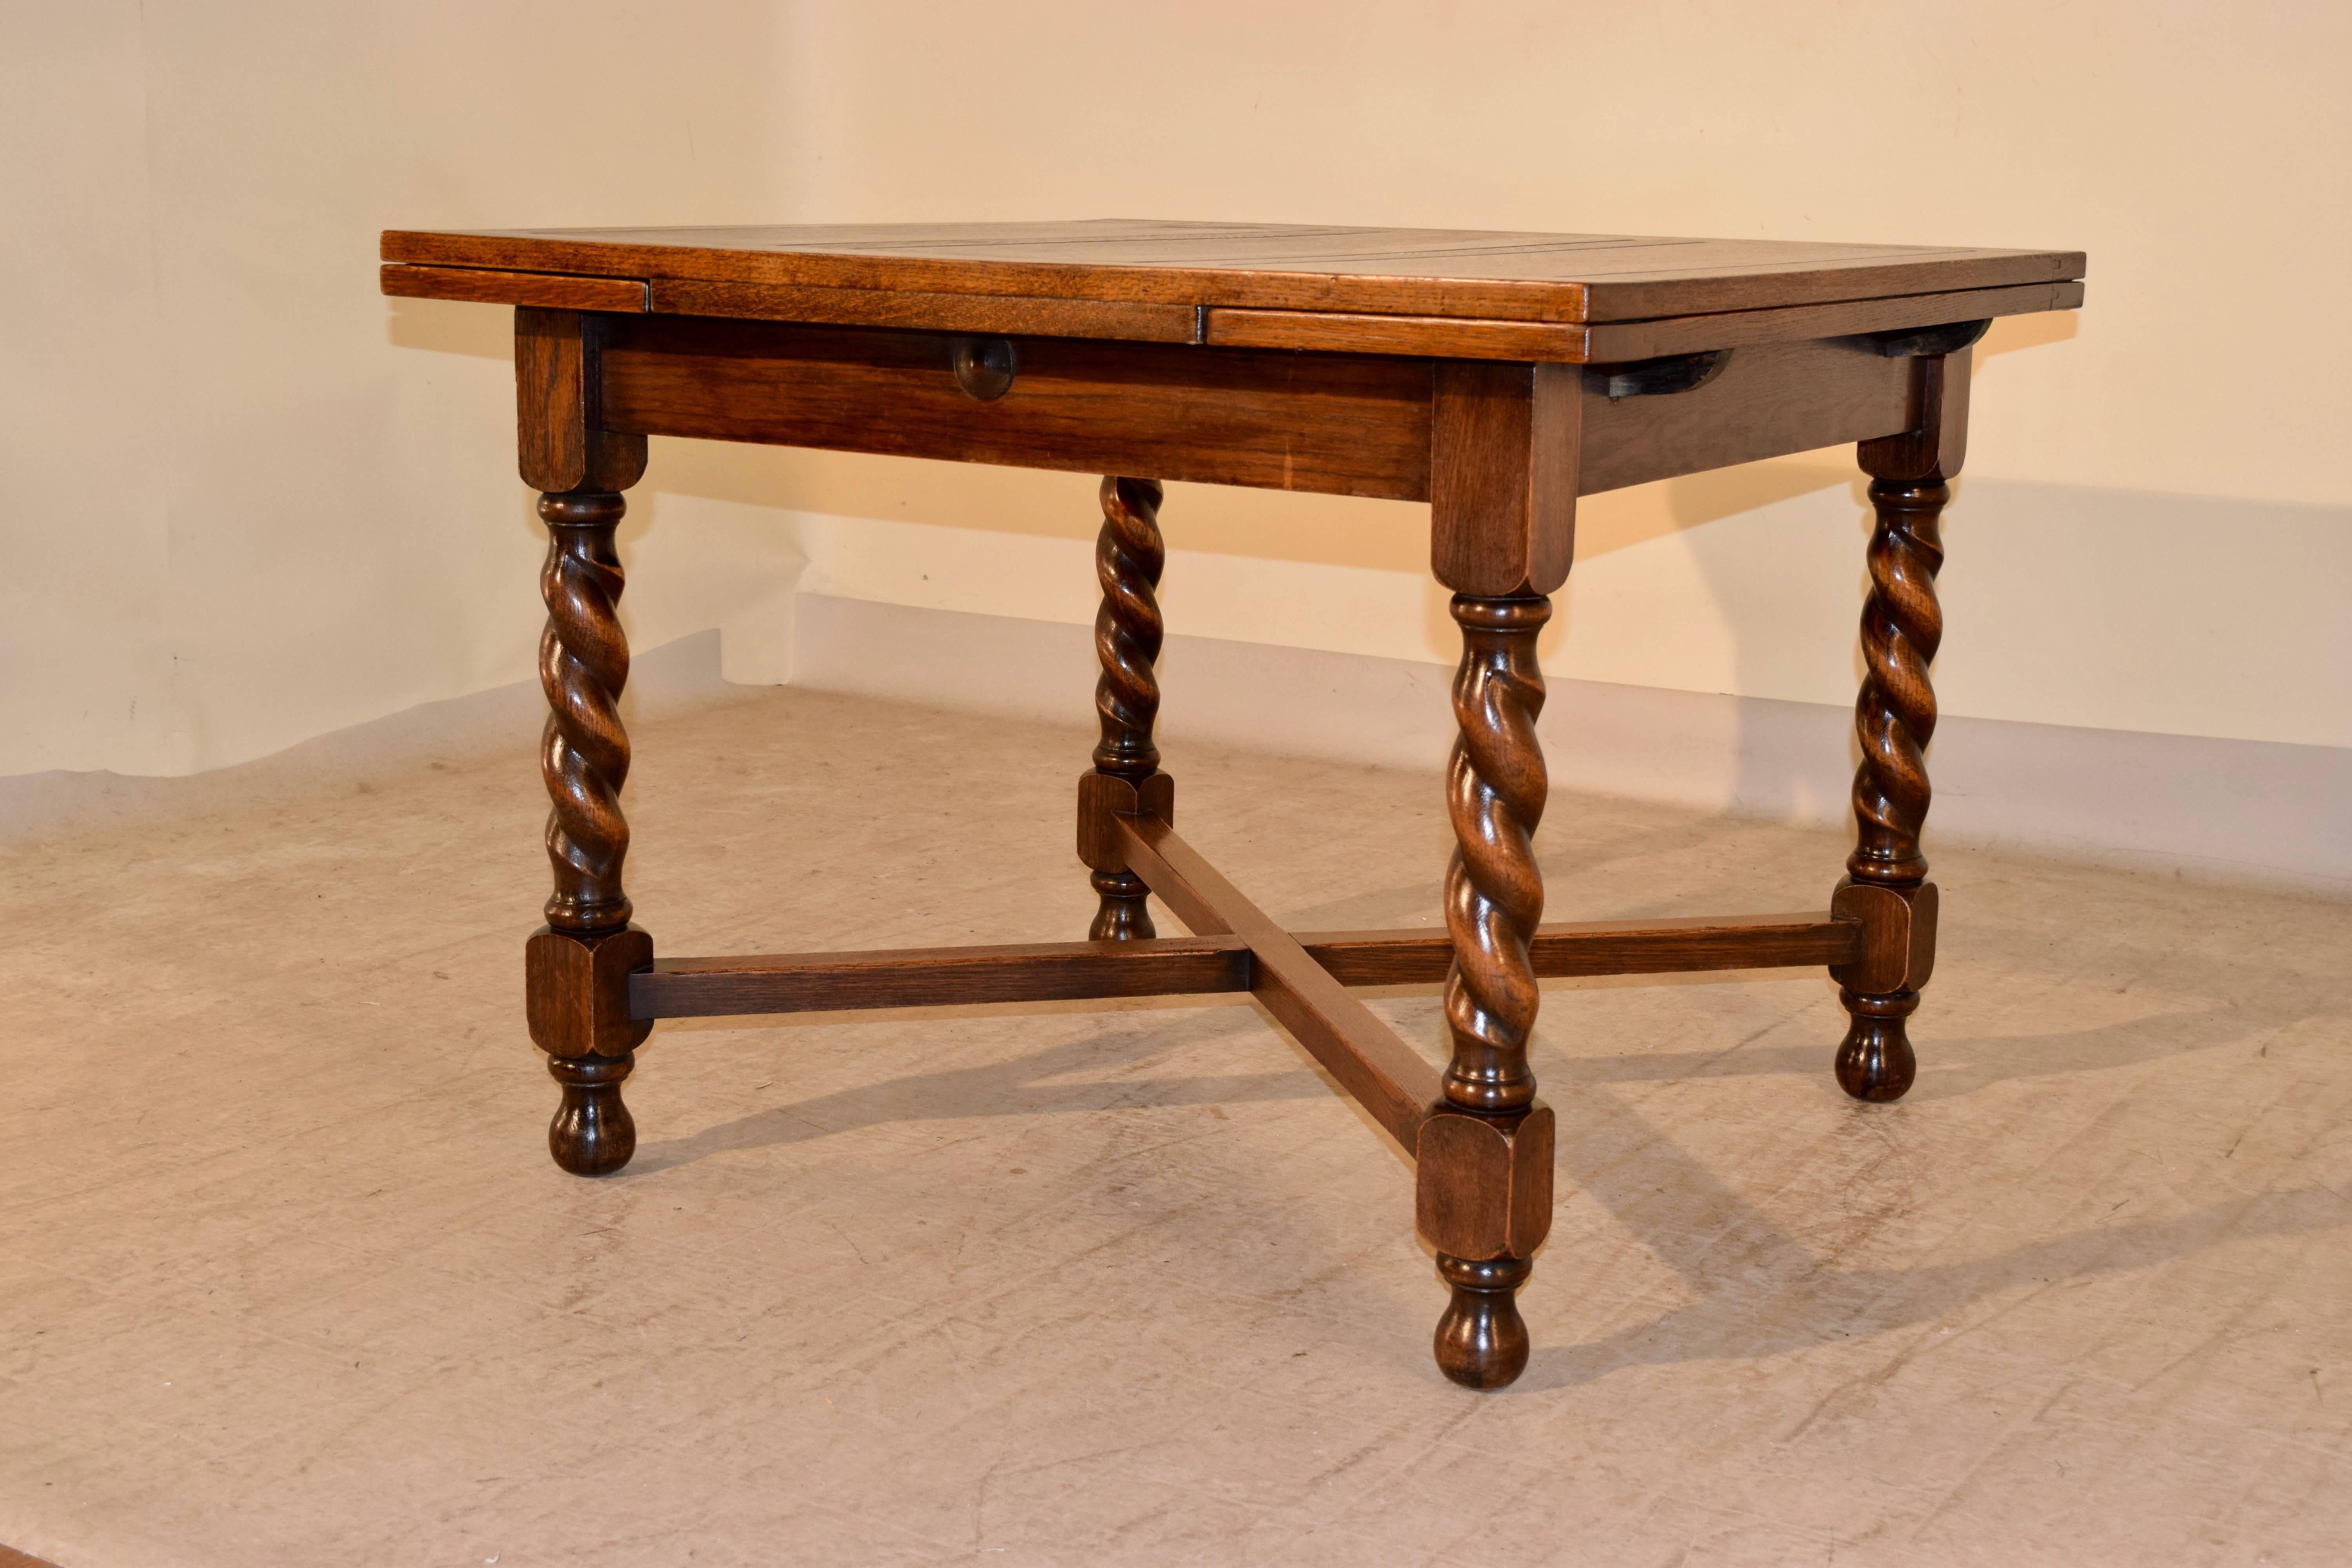 Late 19th century English oak table with two draw leaves. The top and leaves are paneled and follow down to a simple apron. The piece is supported on hand-turned barley twist legs, joined by cross stretchers and raised on turned feet. Top open